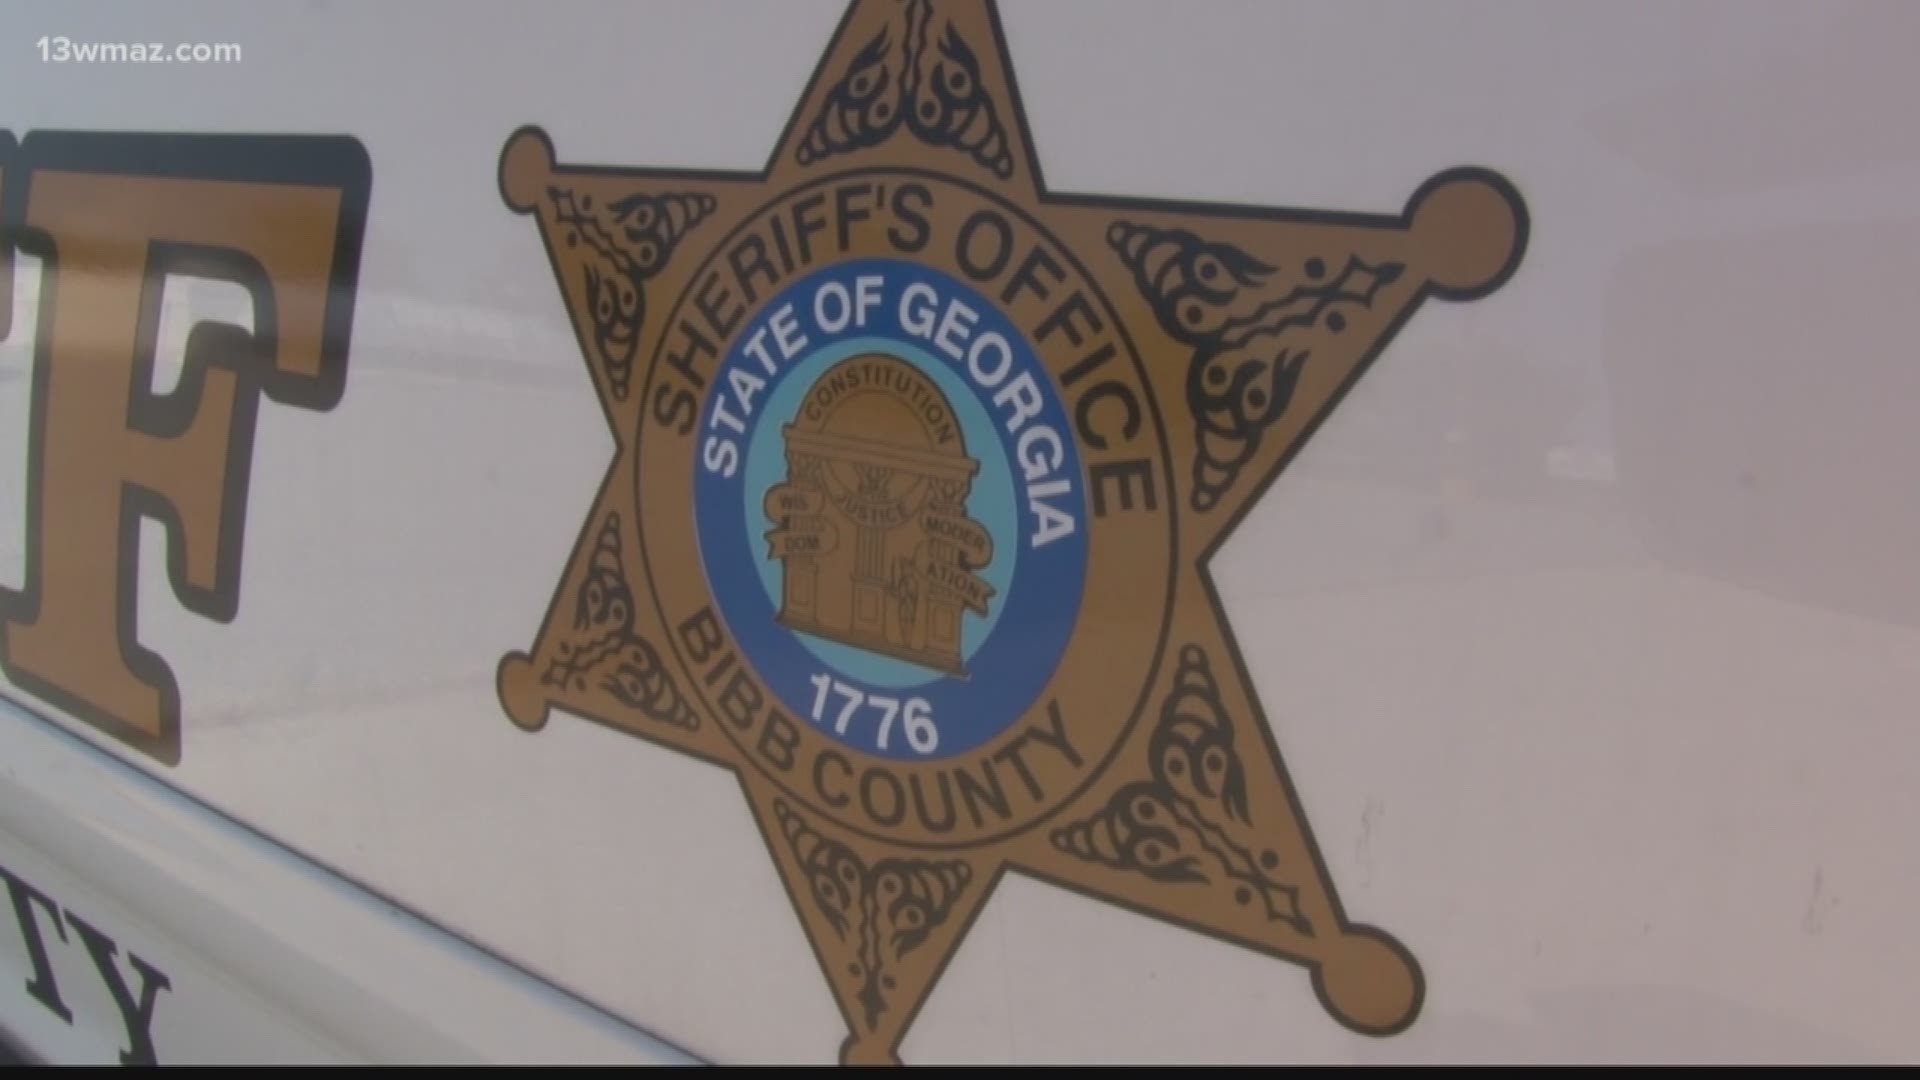 Records from the Bibb County Sheriff's Office show there are nearly 100 fewer deputies patrolling the streets than 5 years ago.